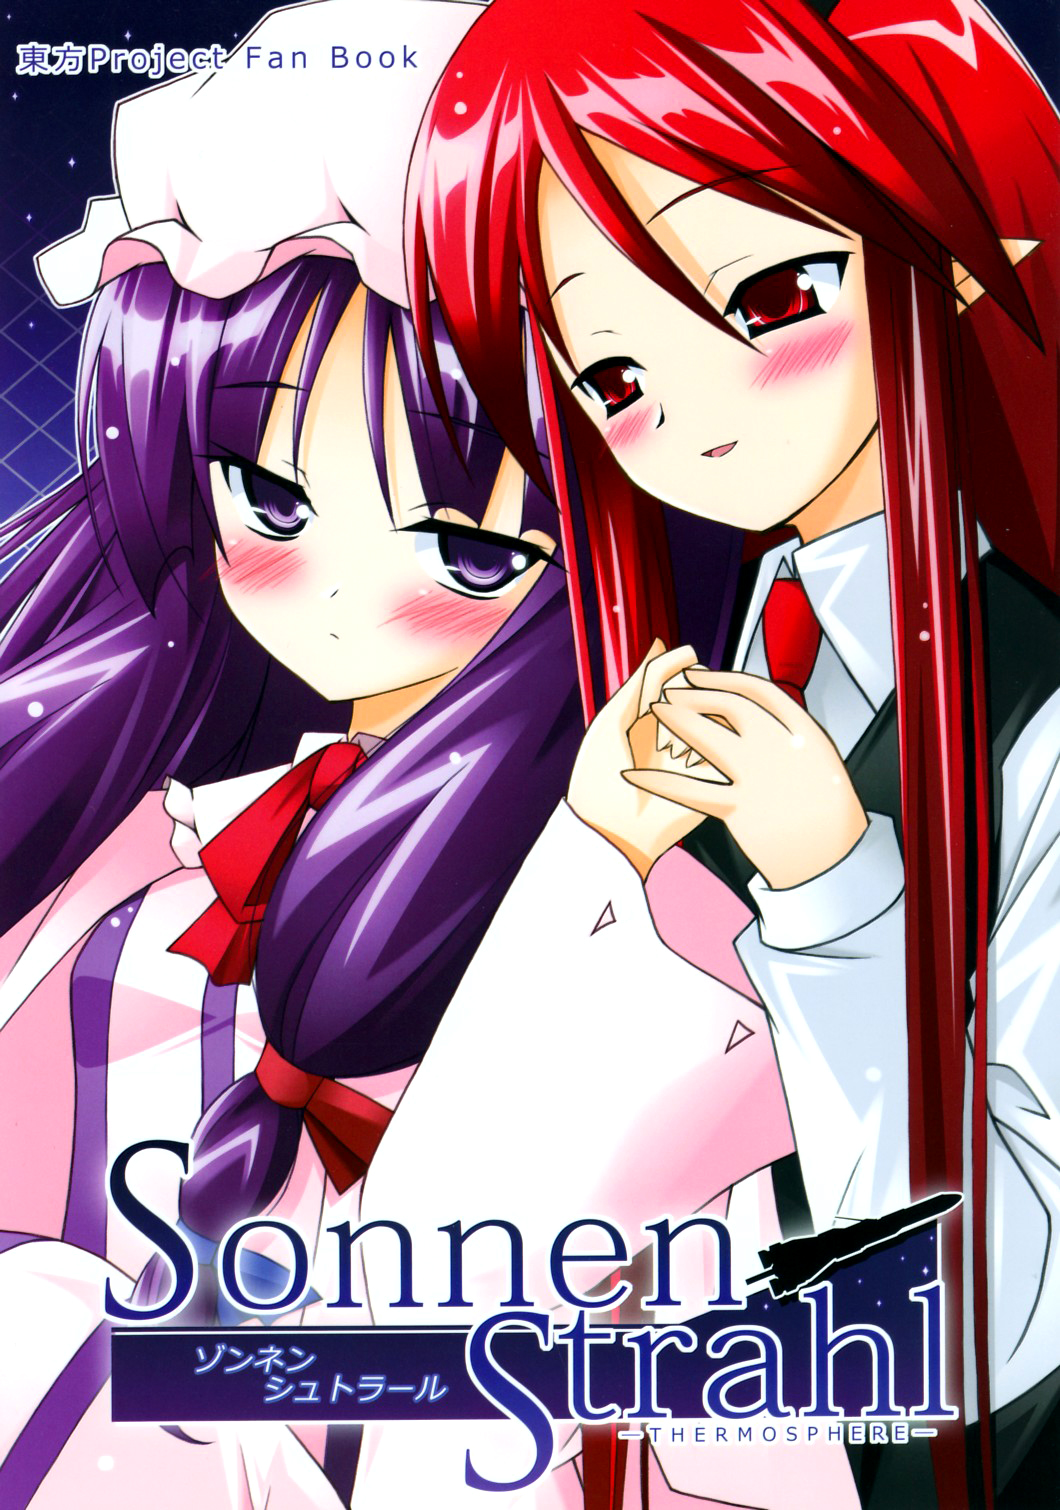 Touhou Sonnen Strahl THERMOSPHERE (Doujinshi) Oneshot